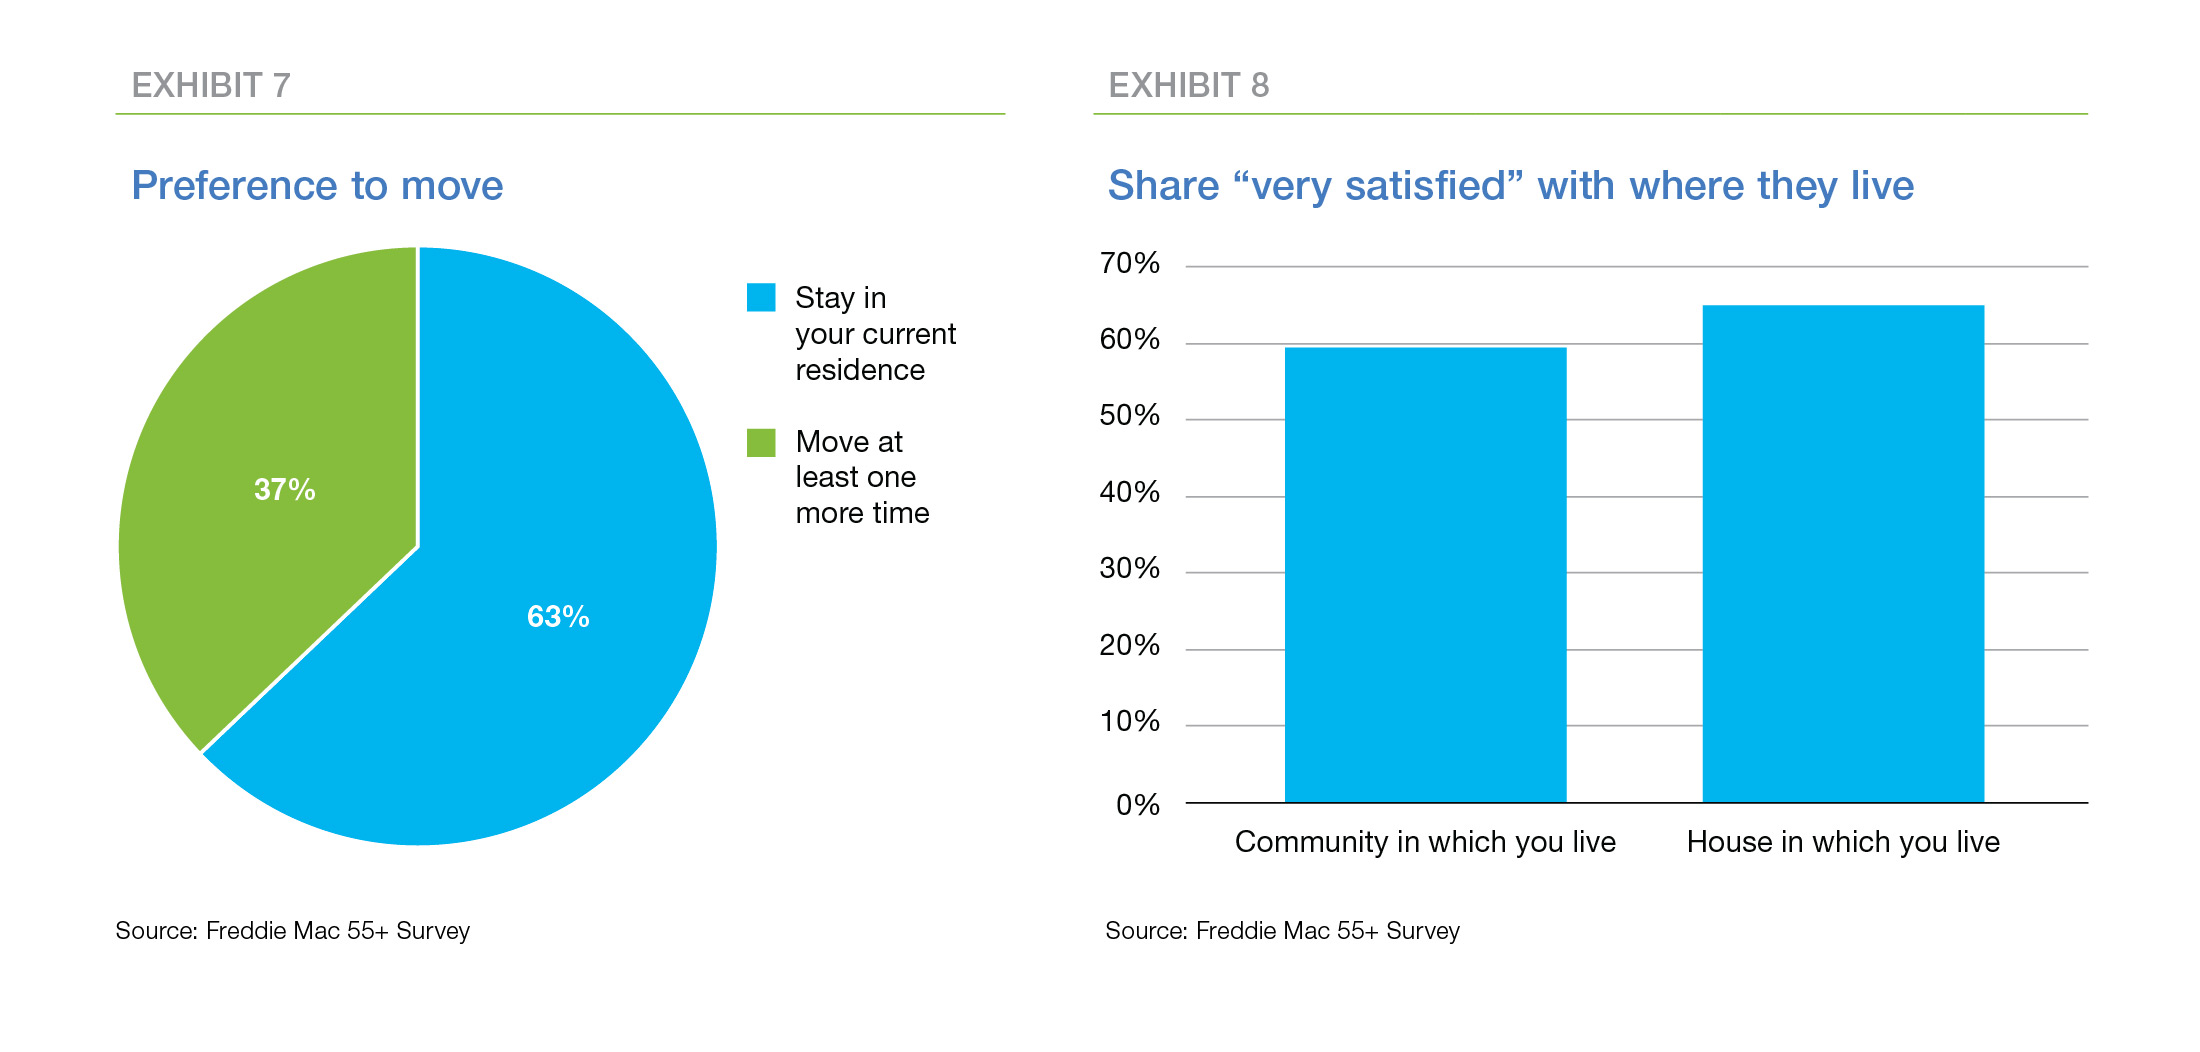 Preference to move and Share "very satisfied" with where they live charts